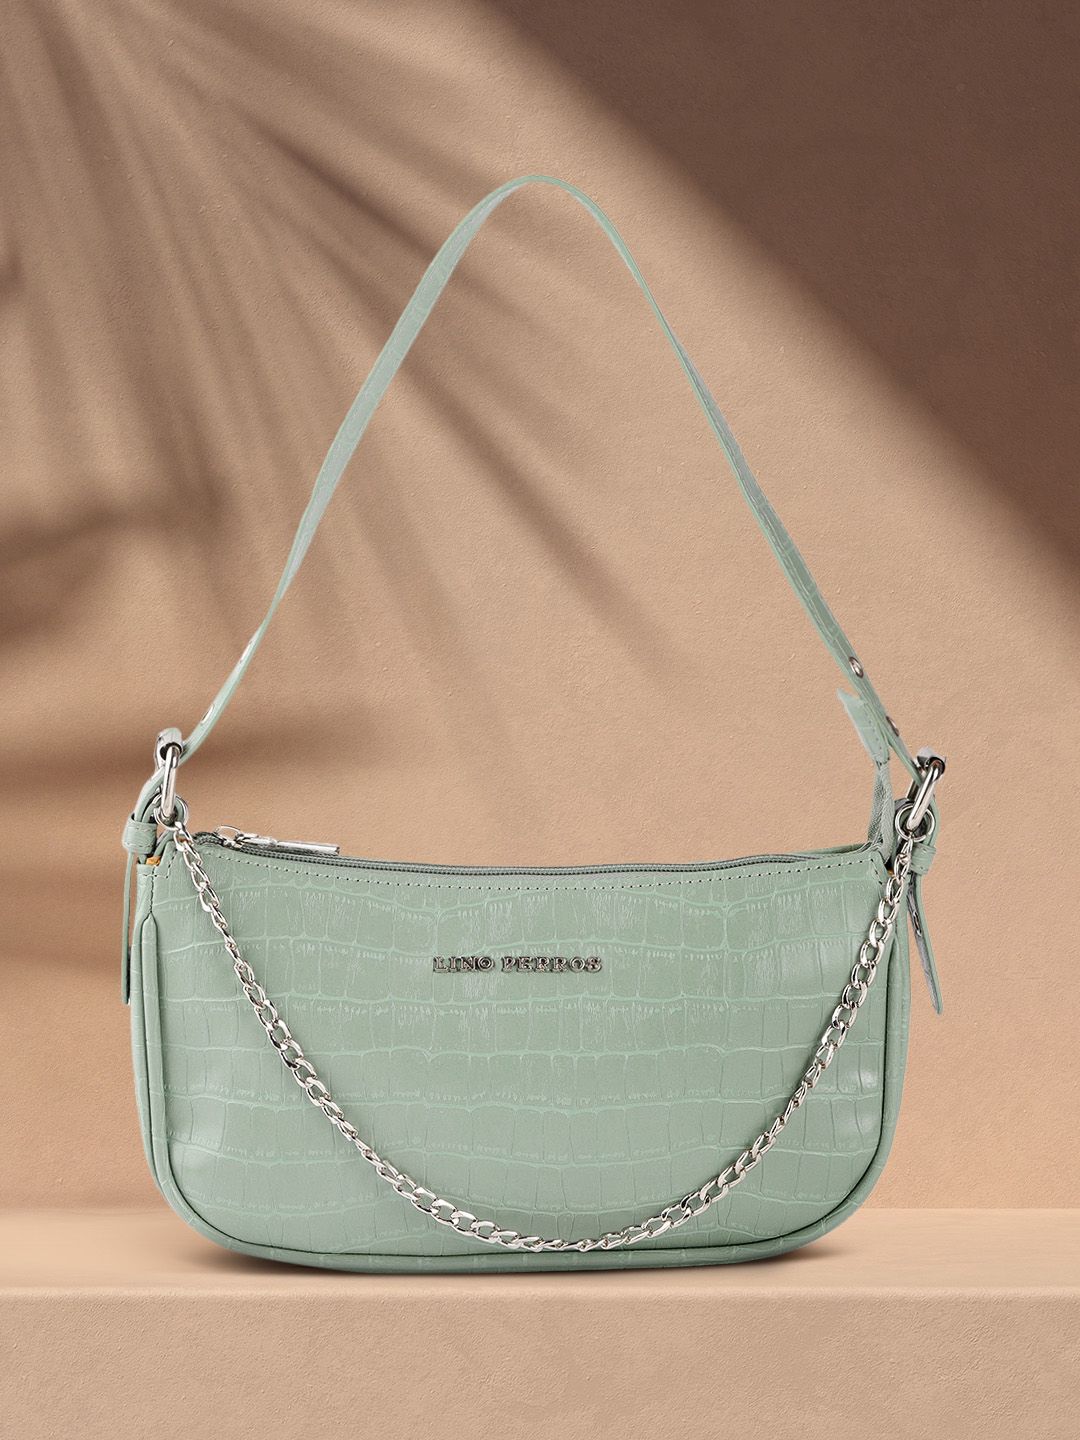 Lino Perros Mint Green Croc Textured Baguette Bag Price in India